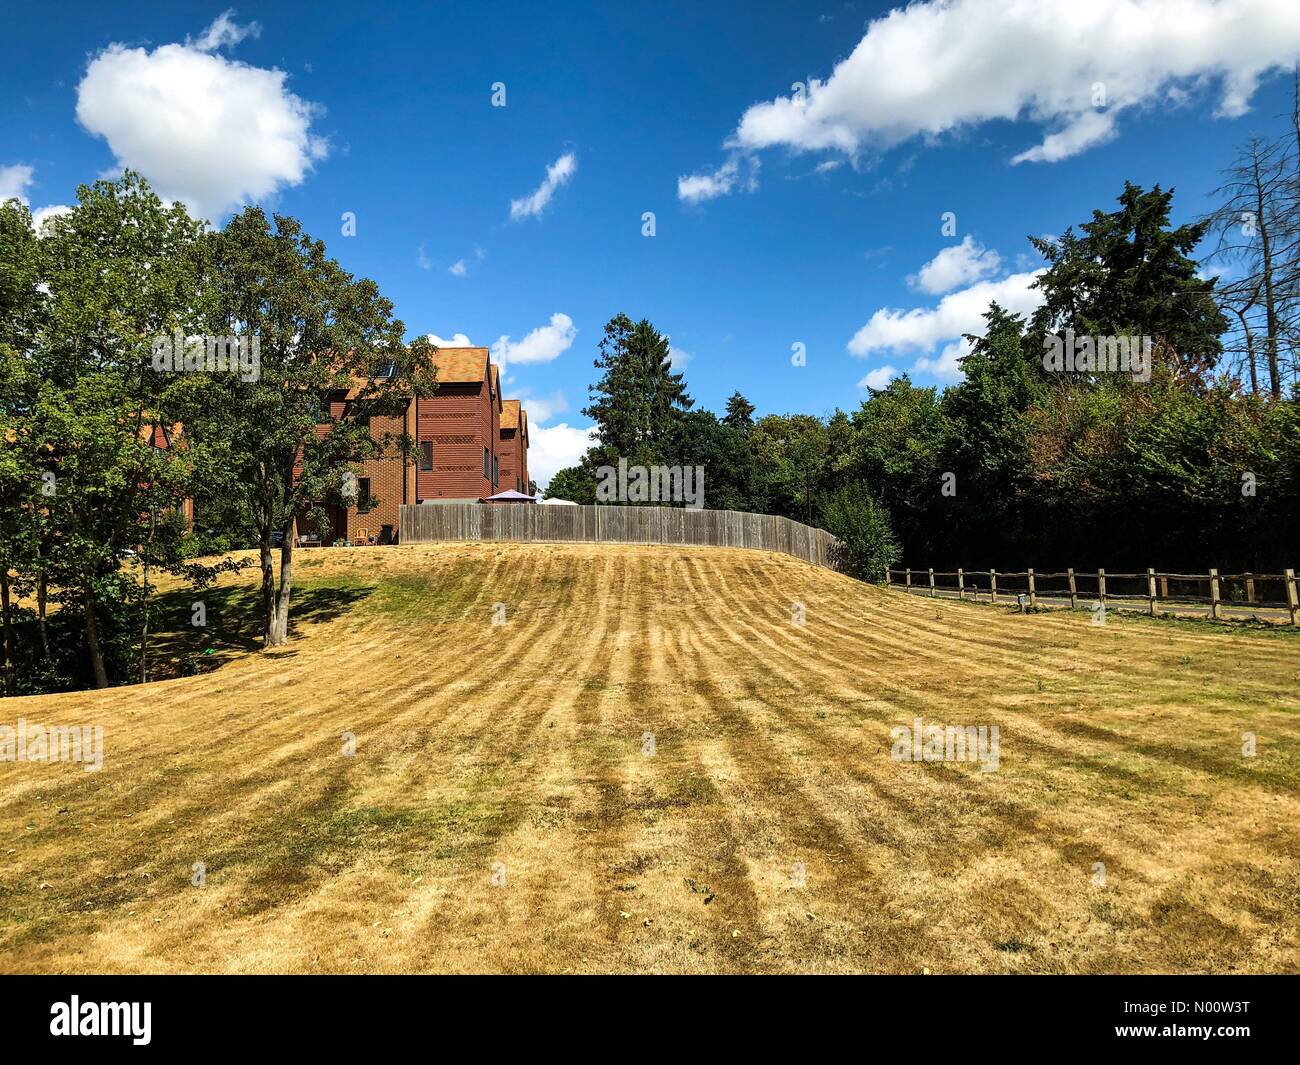 Godalming, UK. 28th July, 2018. UK Weather: Water shortages in Godalming. Sycamore Avenue, Godalming. 28th July 2018. Despite heavy rainfall overnight, water supplies remain critical. Parched lawns in Godalming, Surrey. Credit: jamesjagger/StockimoNews/Alamy Live News Stock Photo